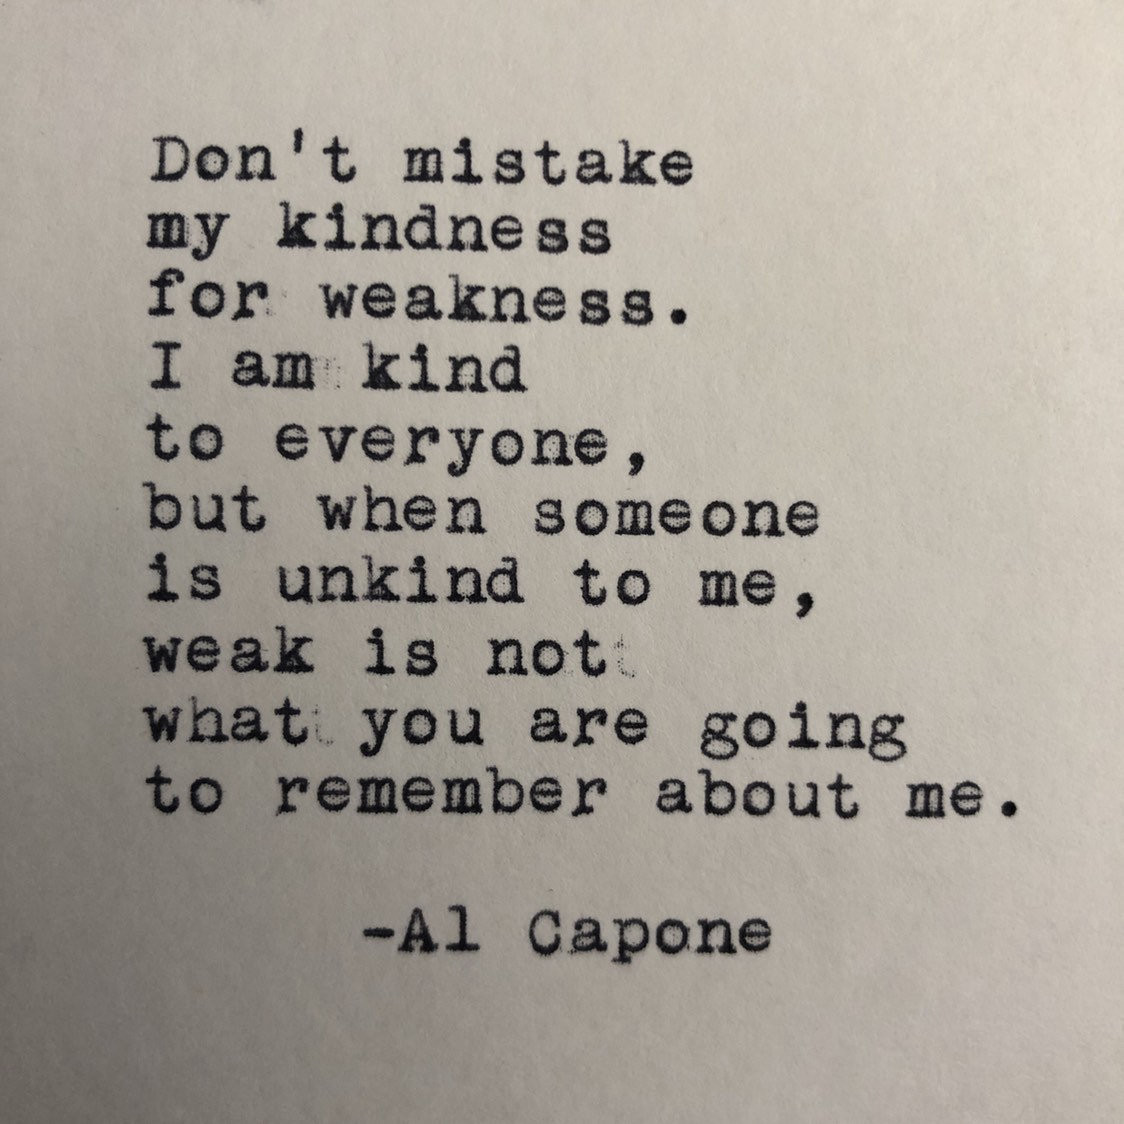 Al Capone Quotes Kindness
 Al Capone Kindness Quote Typed on Typewriter